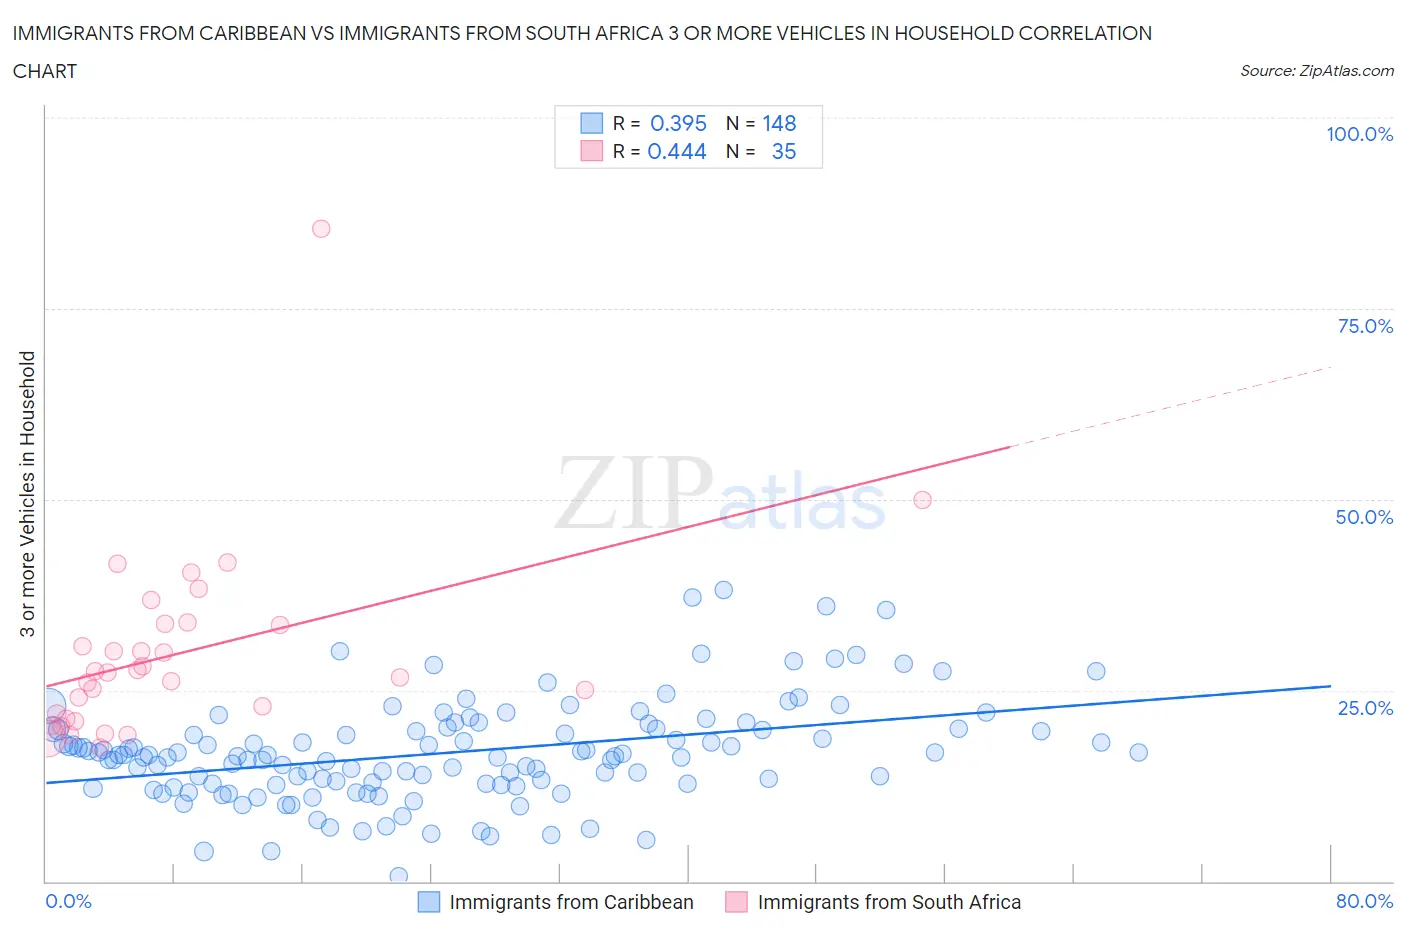 Immigrants from Caribbean vs Immigrants from South Africa 3 or more Vehicles in Household